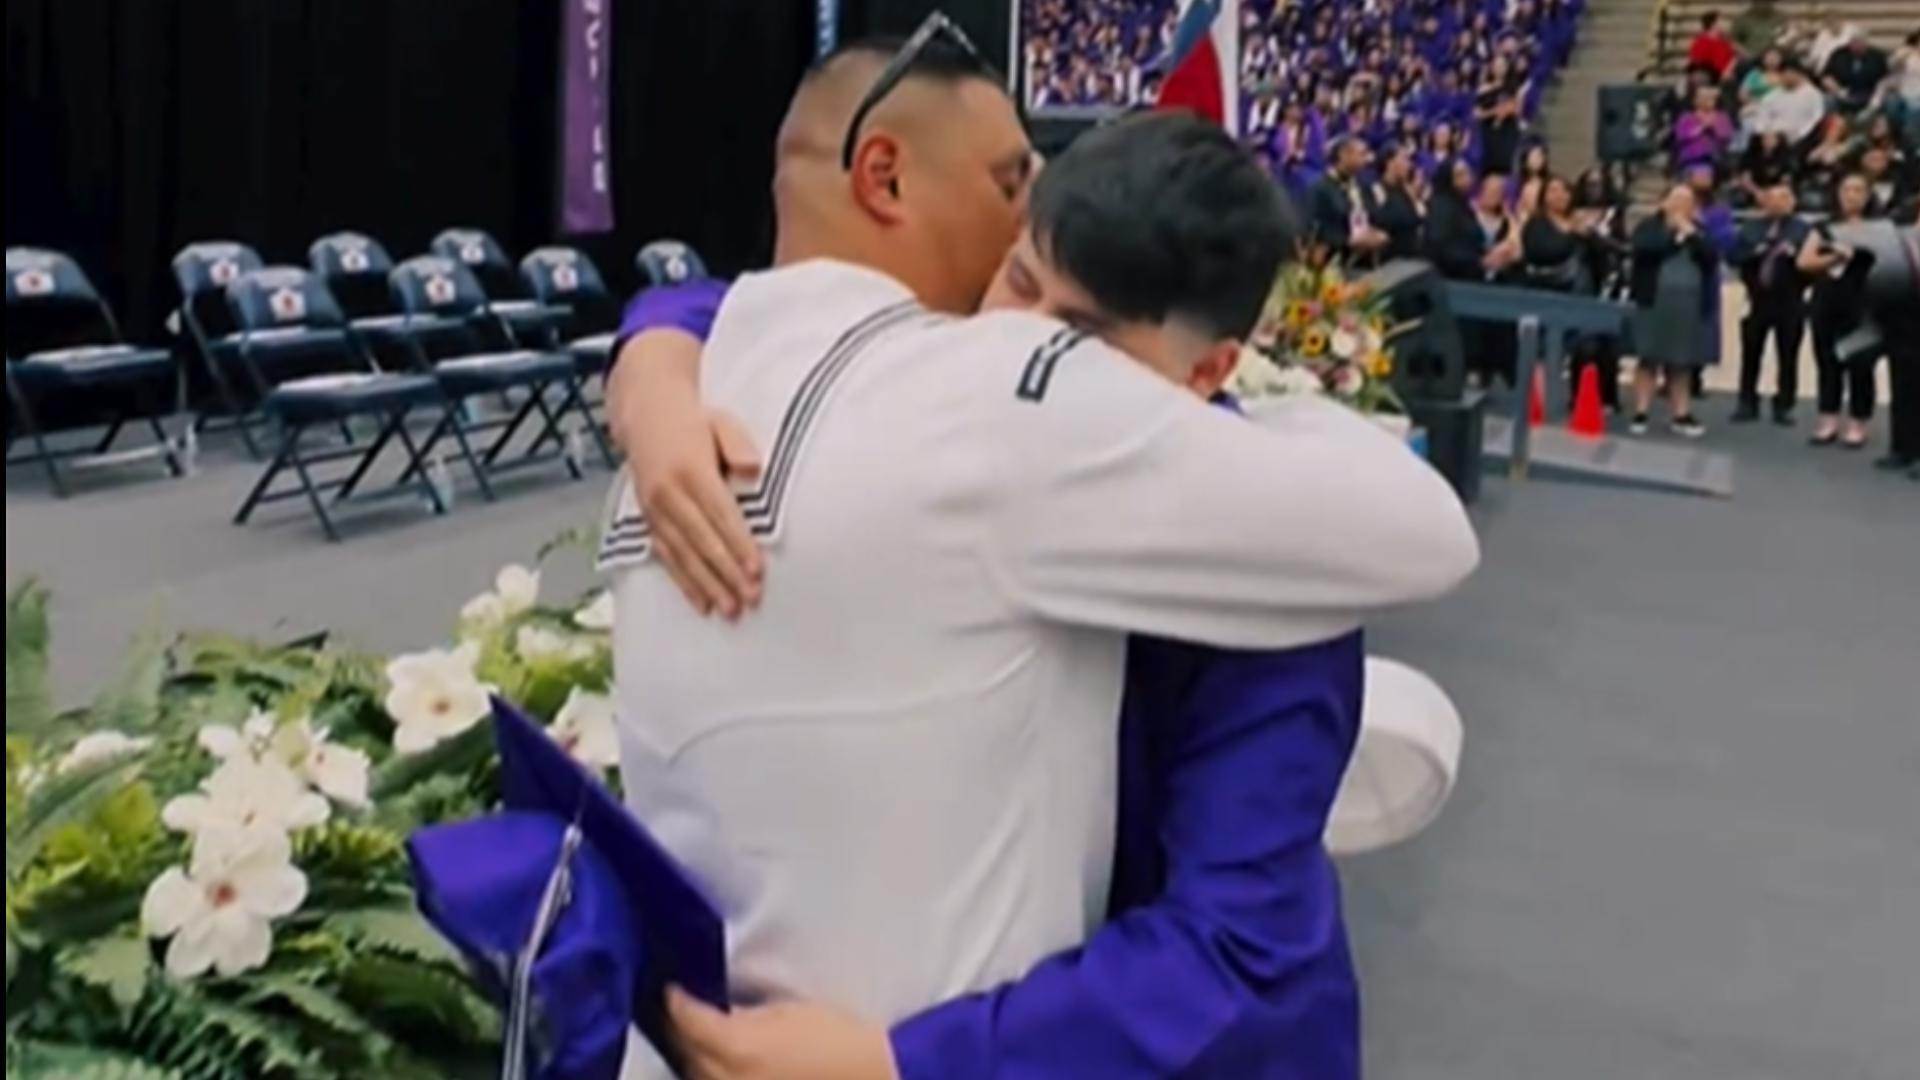 David Castillo flew 17 hours from his Navy post to see his son graduate from Brackenridge High School.